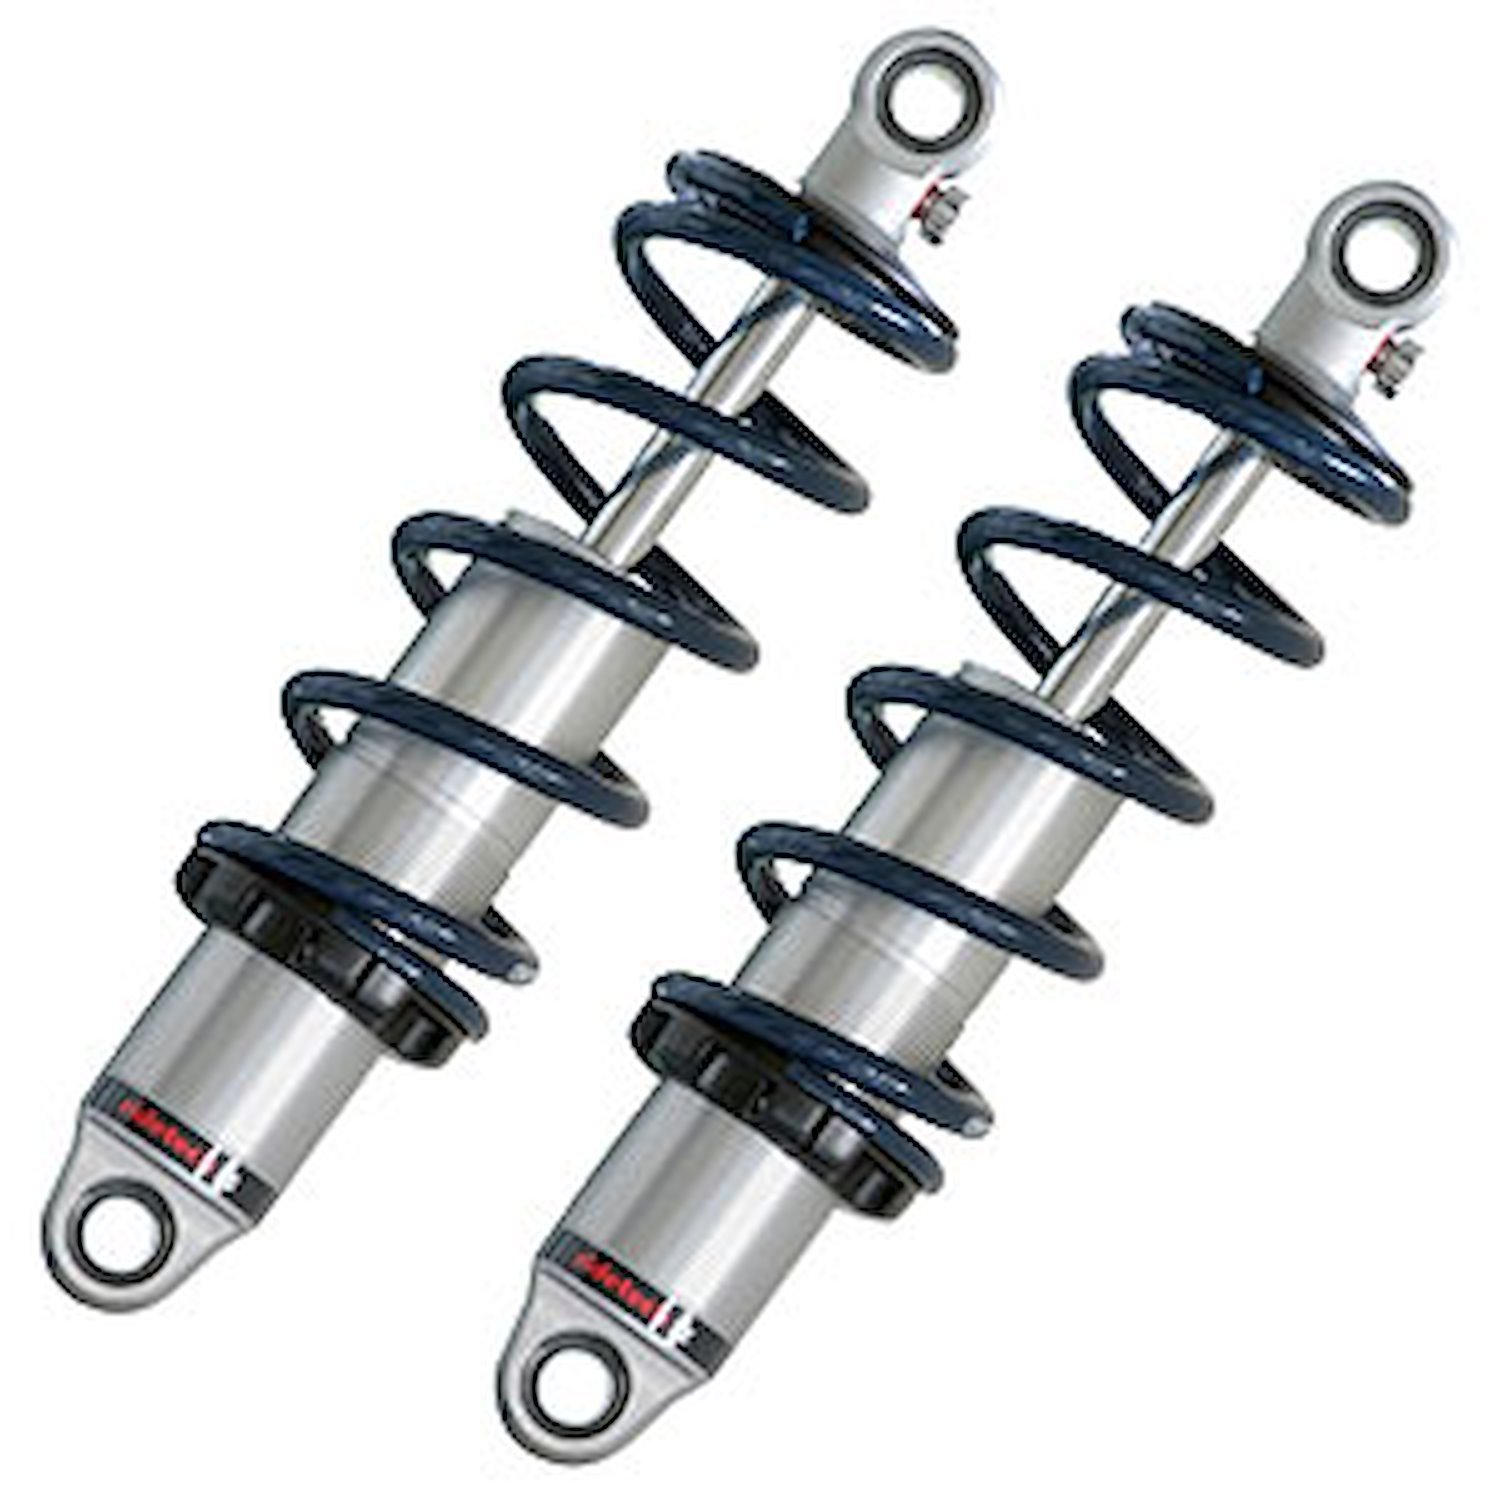 HQ Series Single-Adjustable Rear Coil-Over Shocks 1968-1979 Chevy